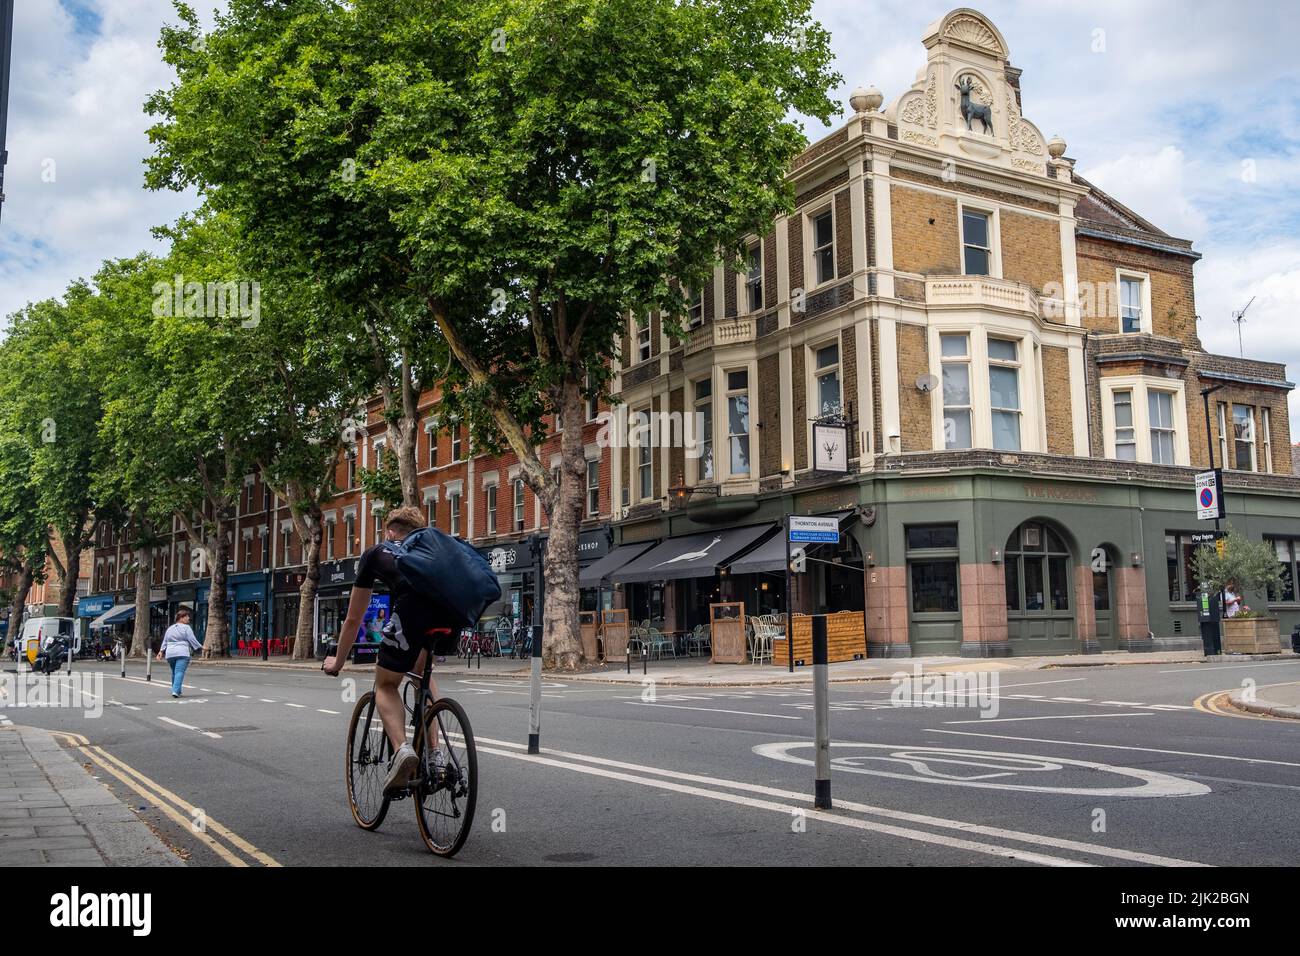 London- July 2022: Chiswick High Road summer scene, a long street of attractive high street shops in an aspirational area of West London Stock Photo